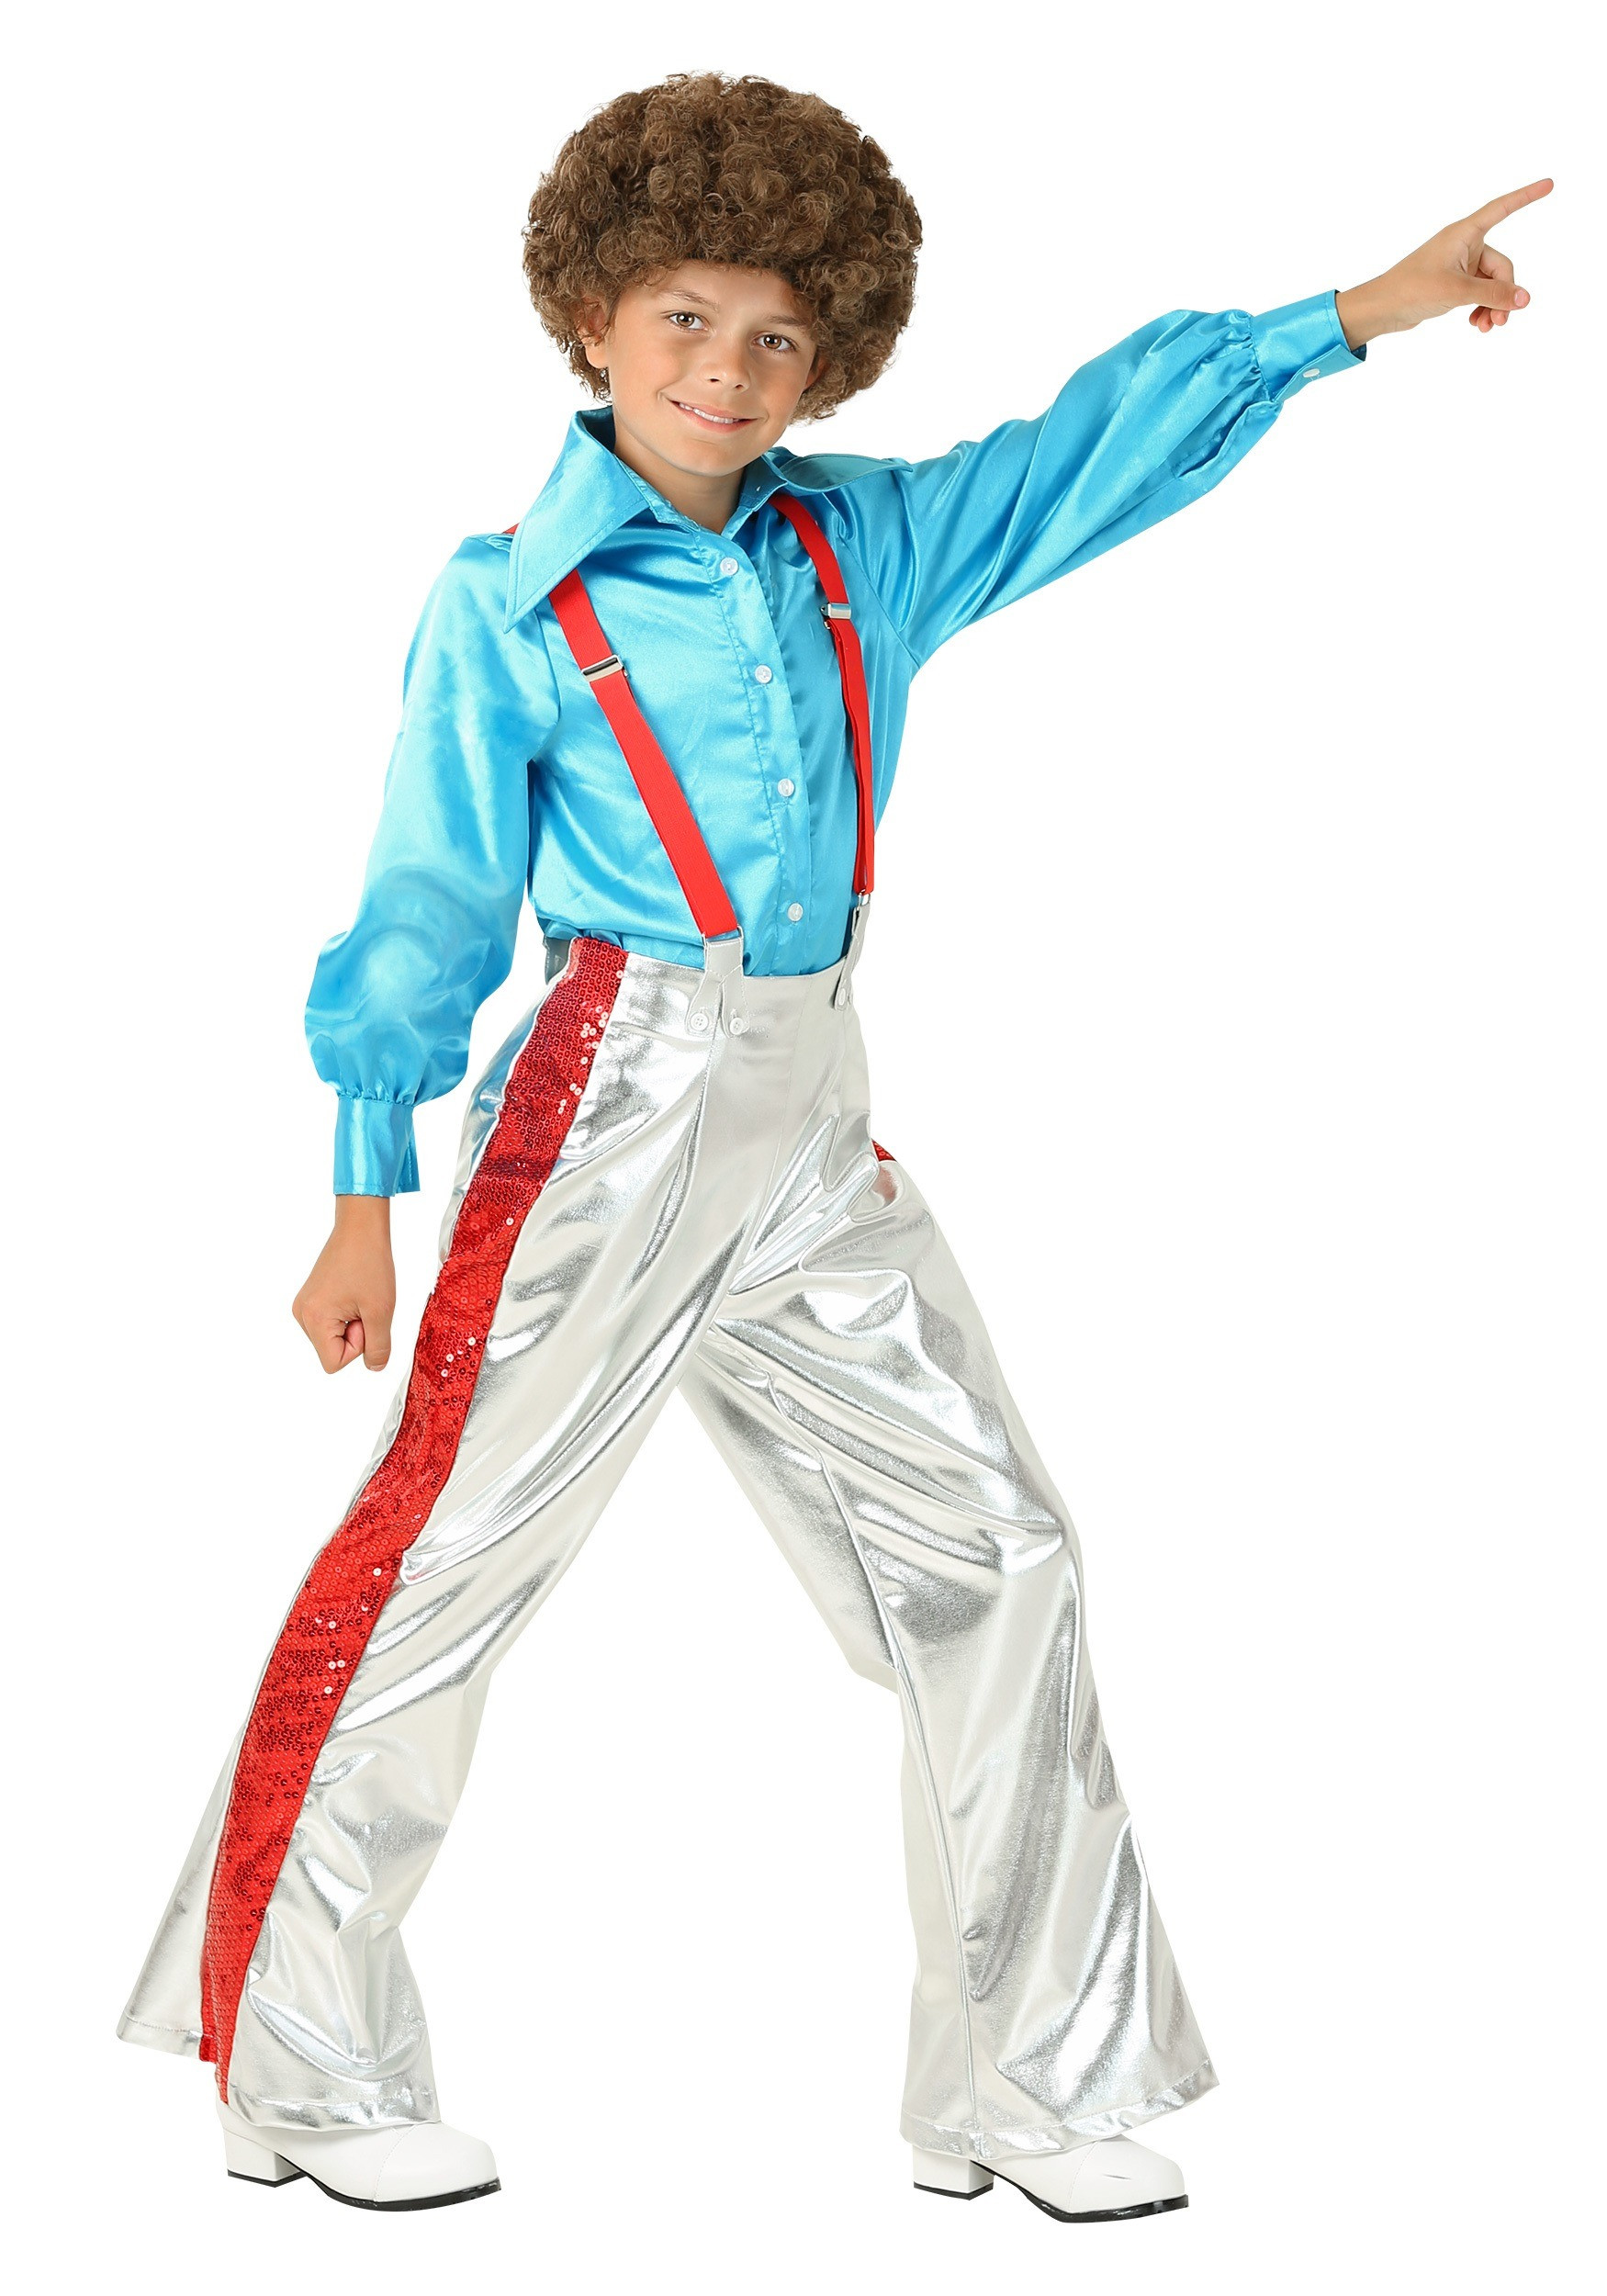 70S Dress Up Ideas For Kids
 Funky Disco Boys Costume